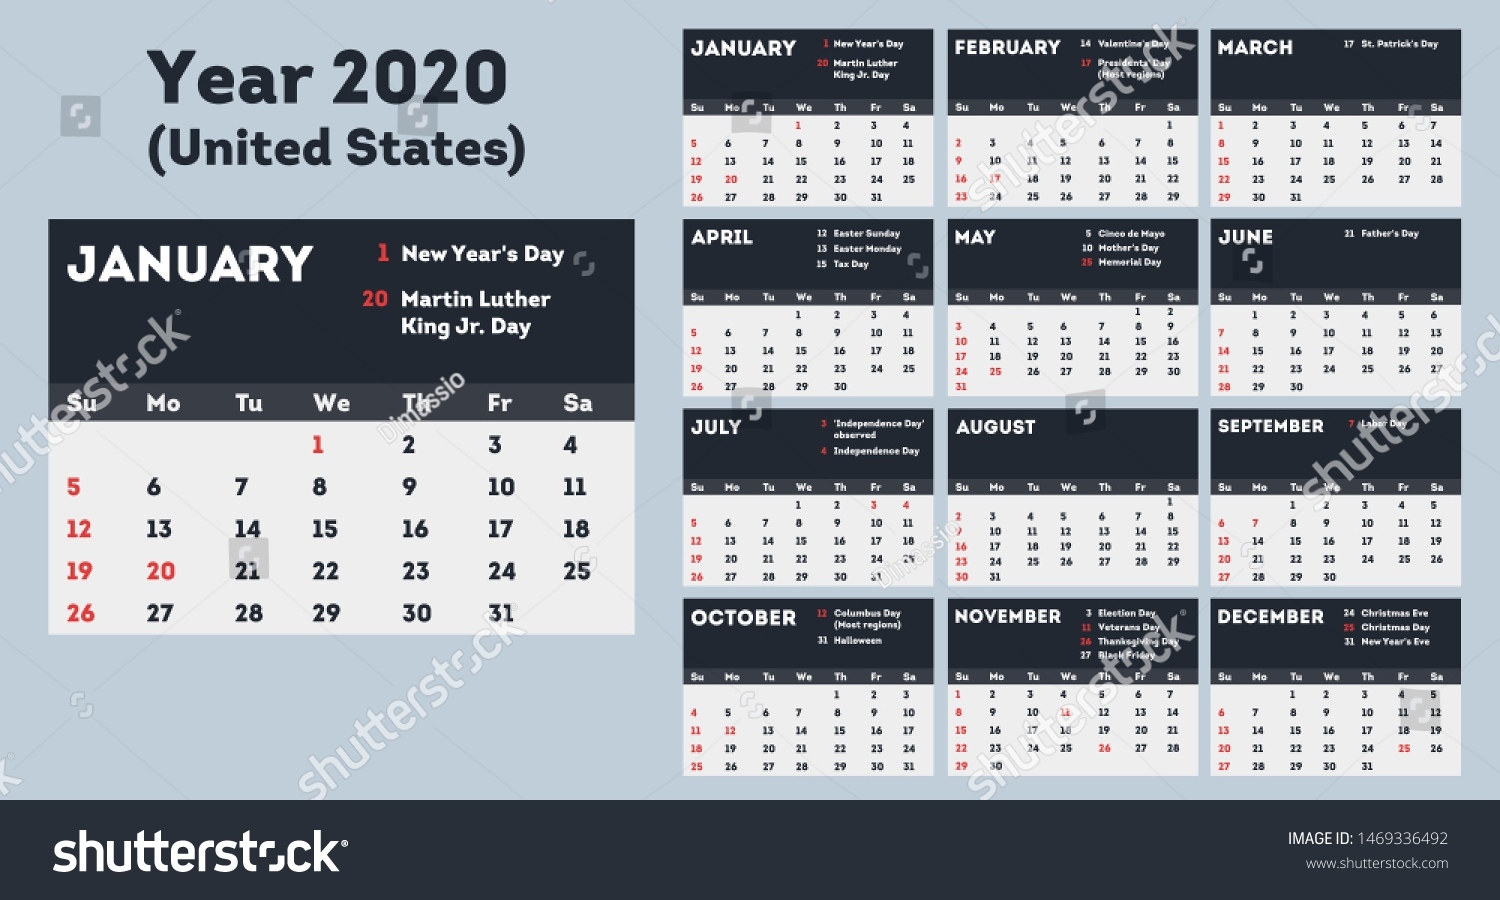 Calendar 2020 Template United States Holidays Stock Vector 2020 Calendar With Holidays And Observances